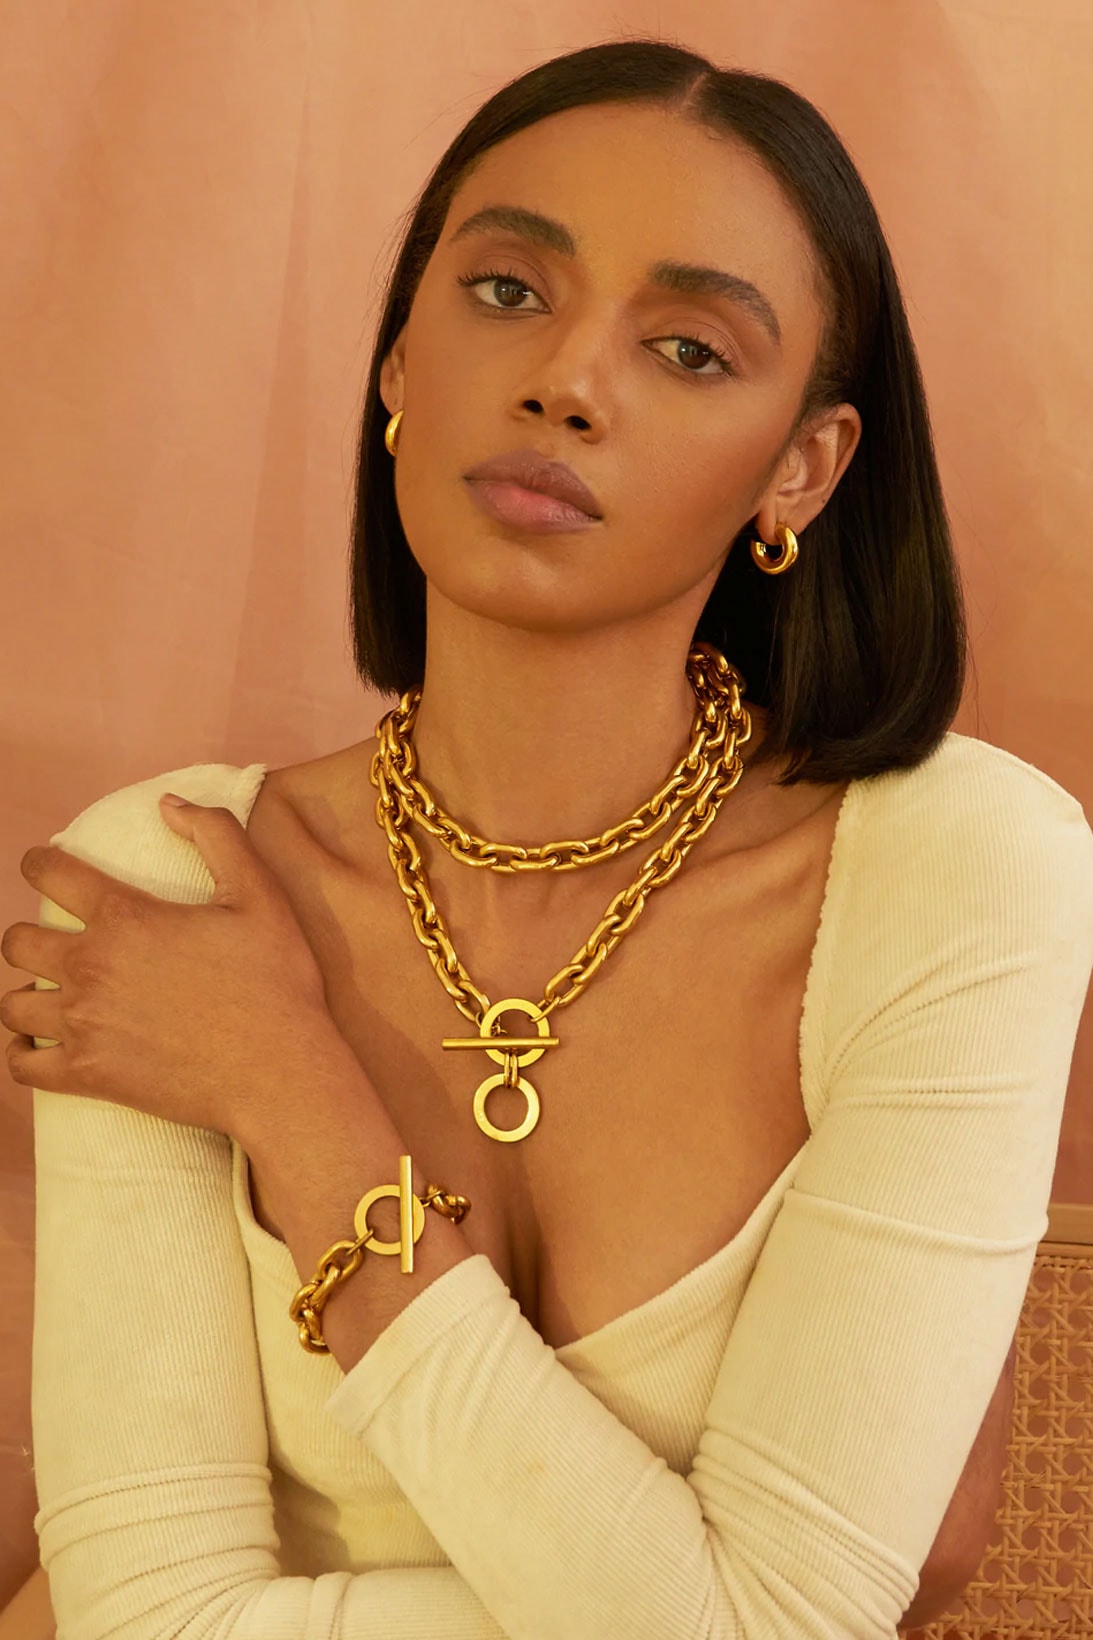 Oma the Label Chain Necklace Earrings